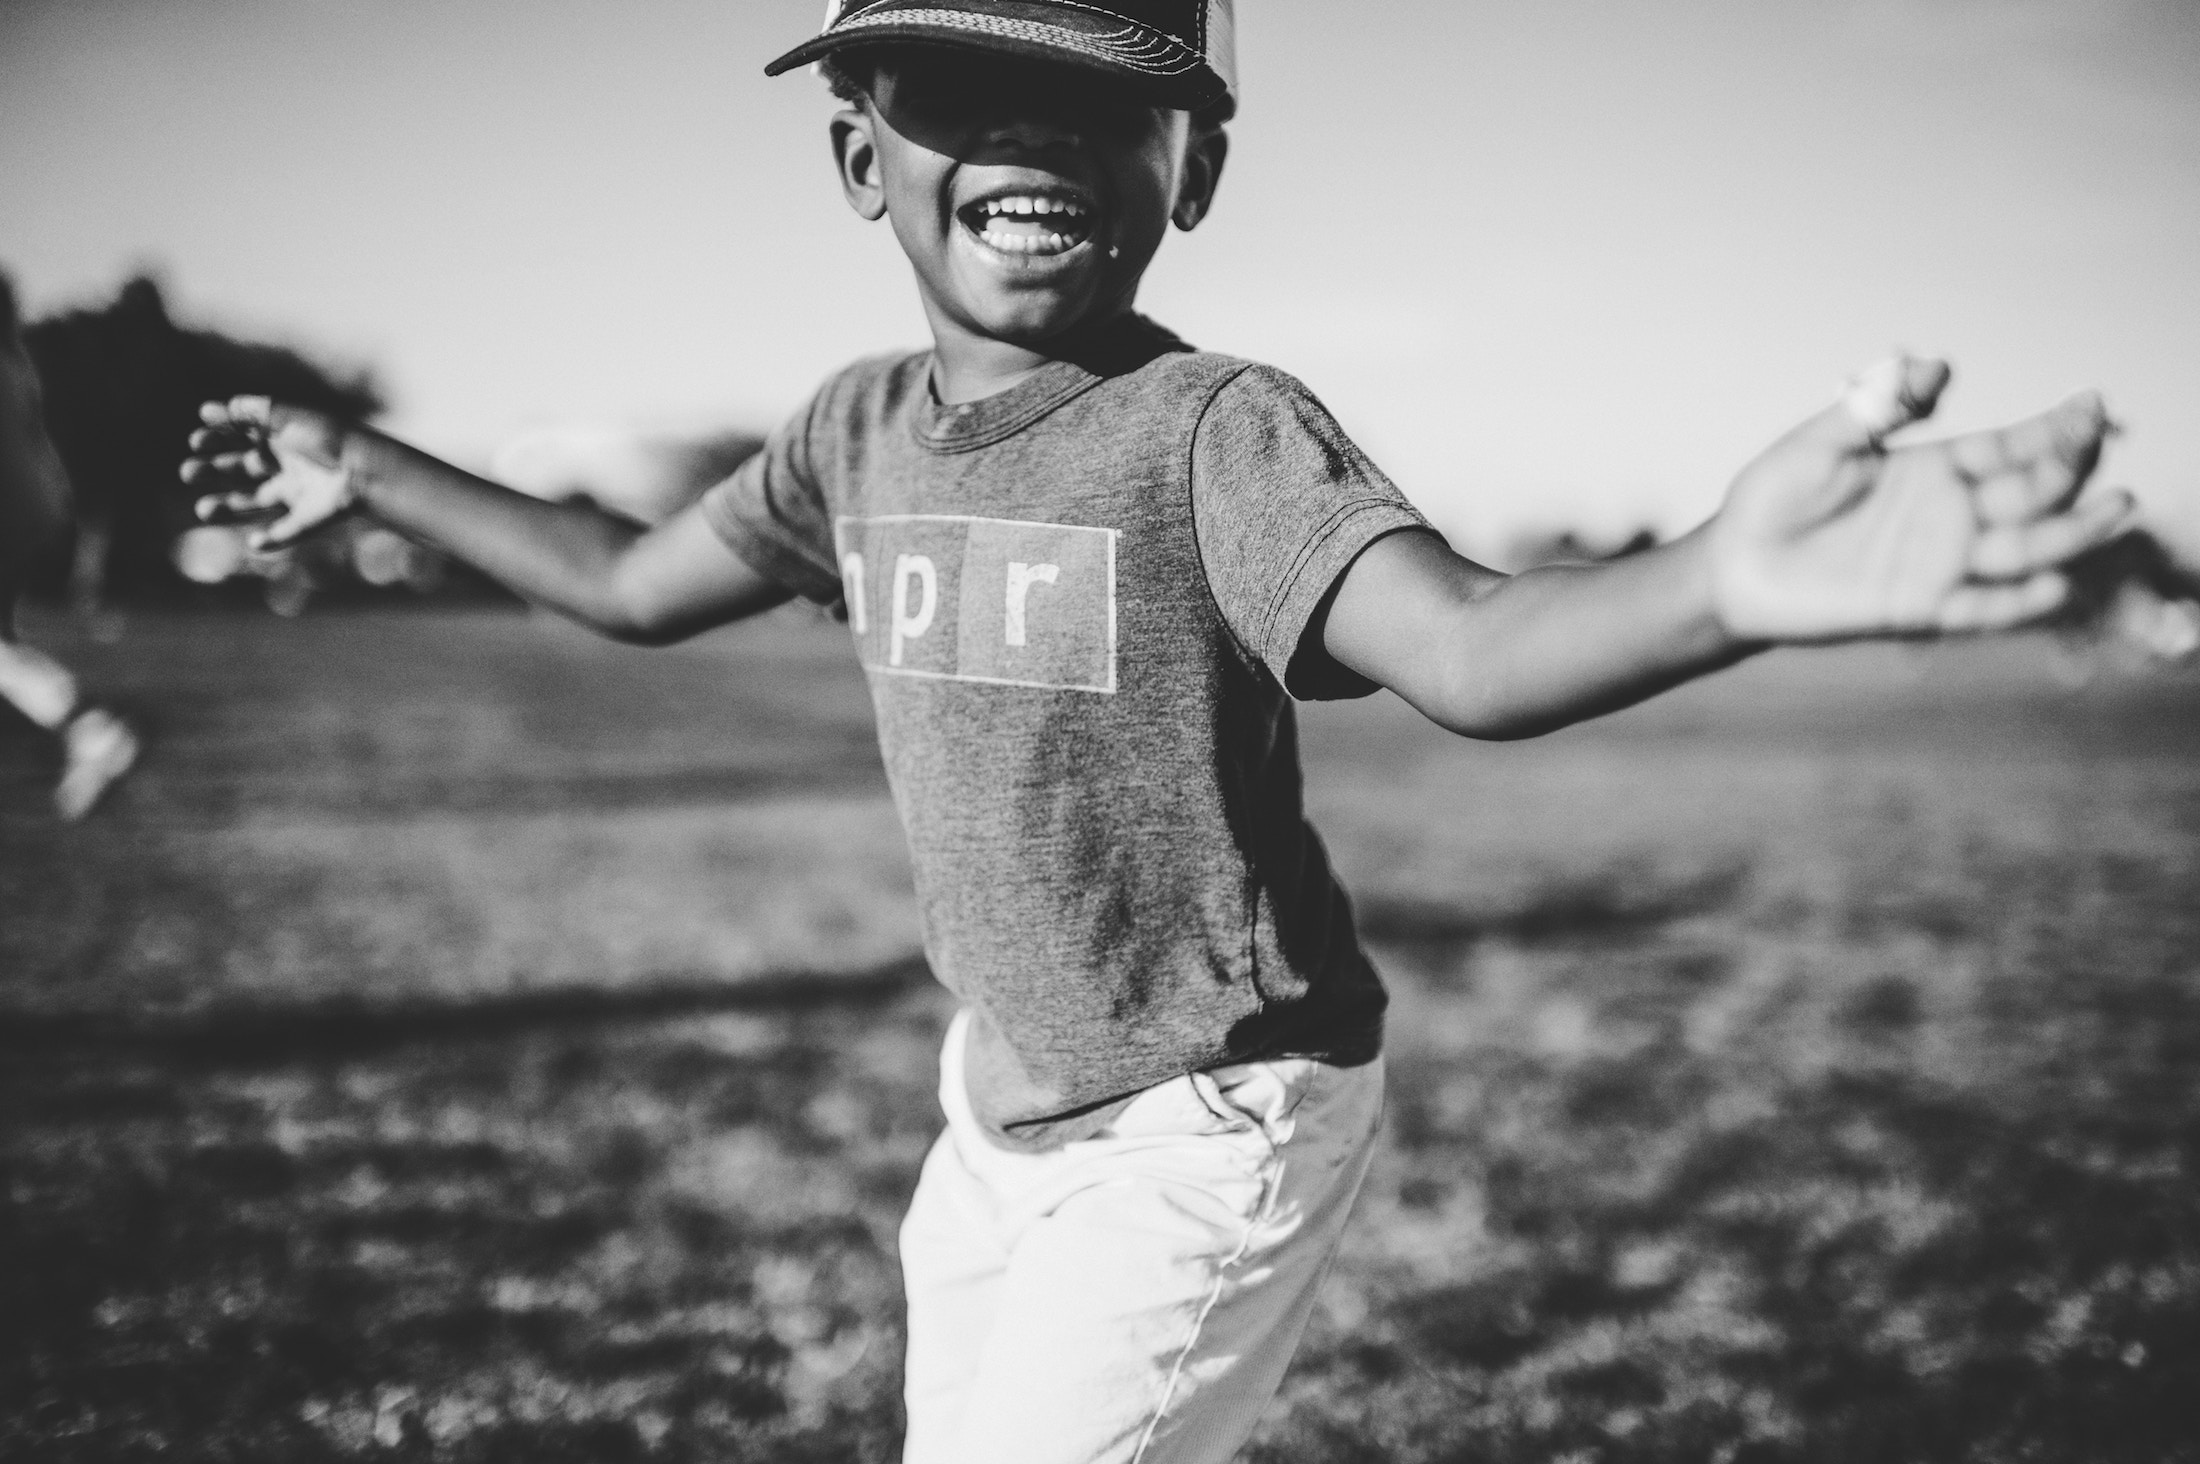 African American child with a baseball helmet on and his arms extended with a smile on his face.